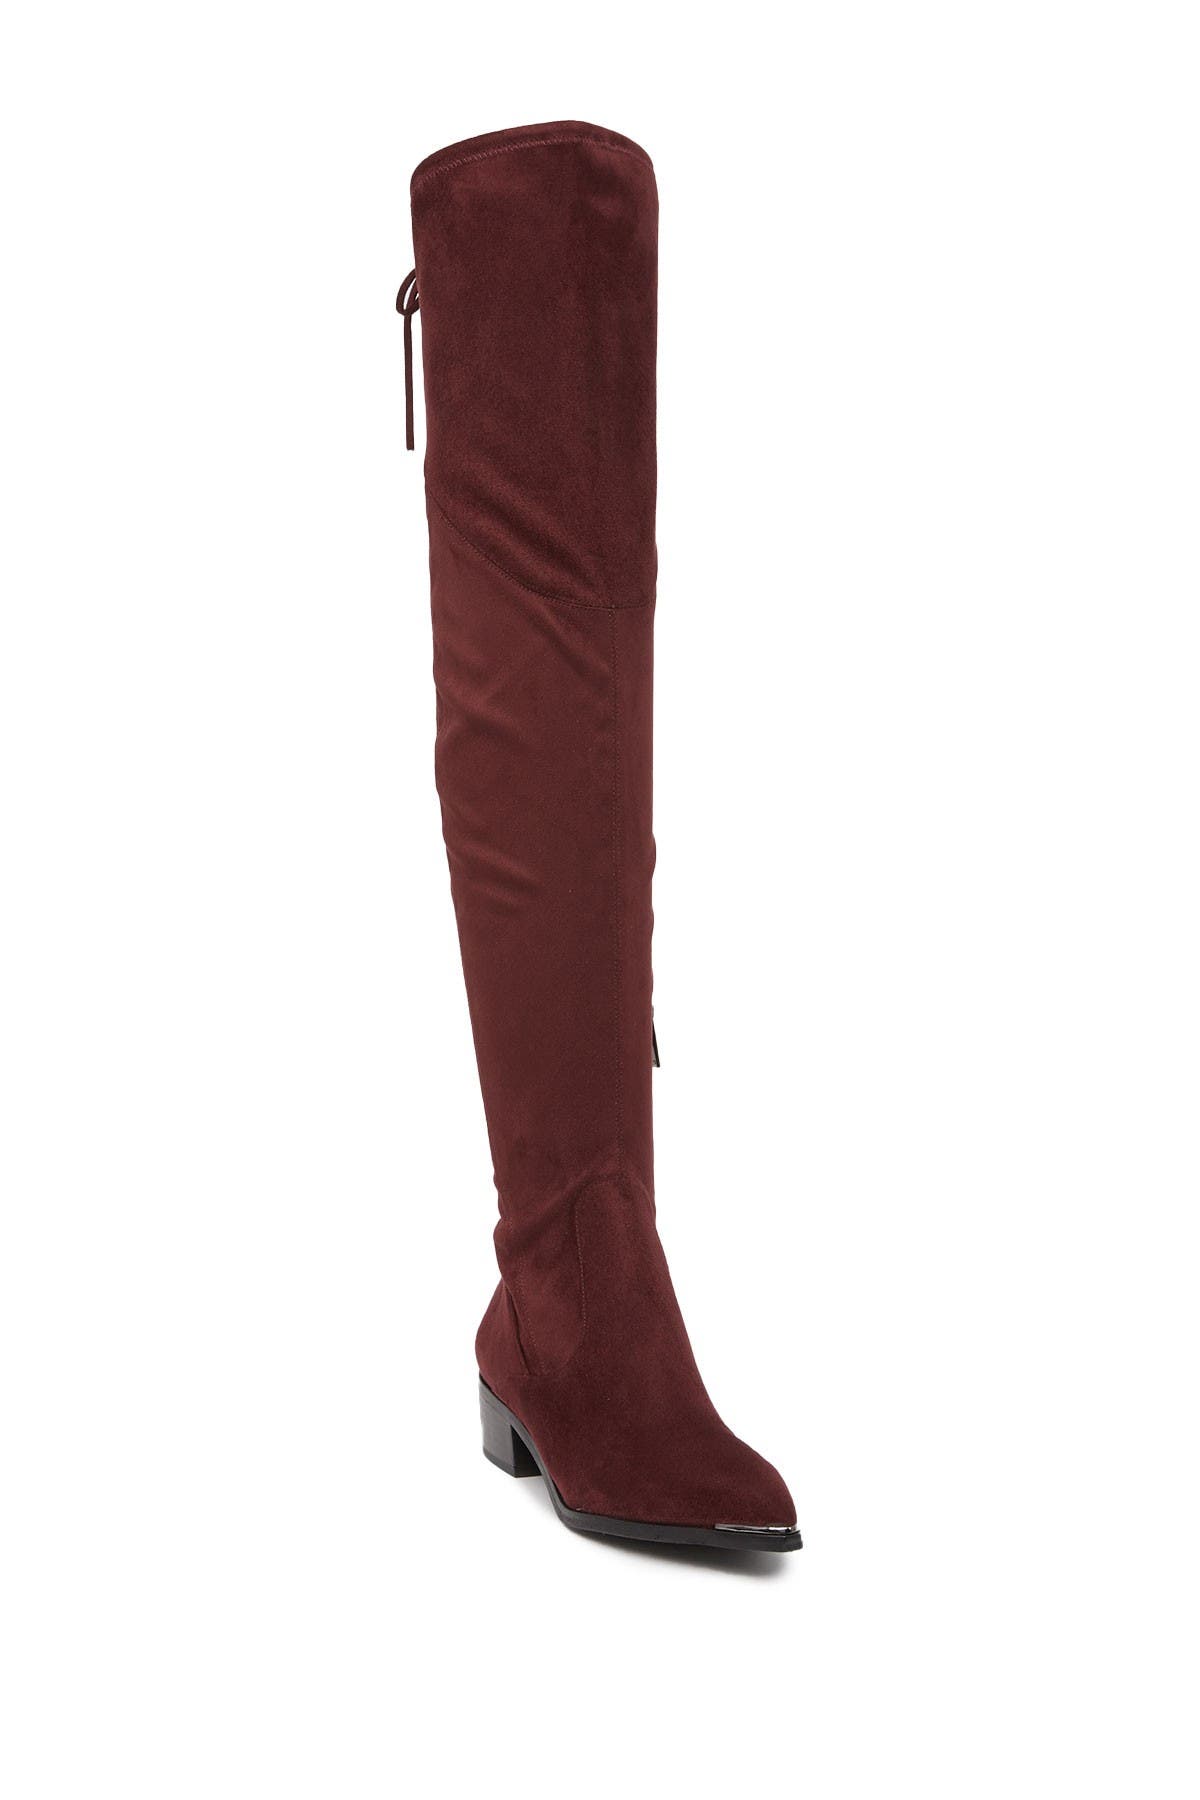 narrow calf over the knee boots